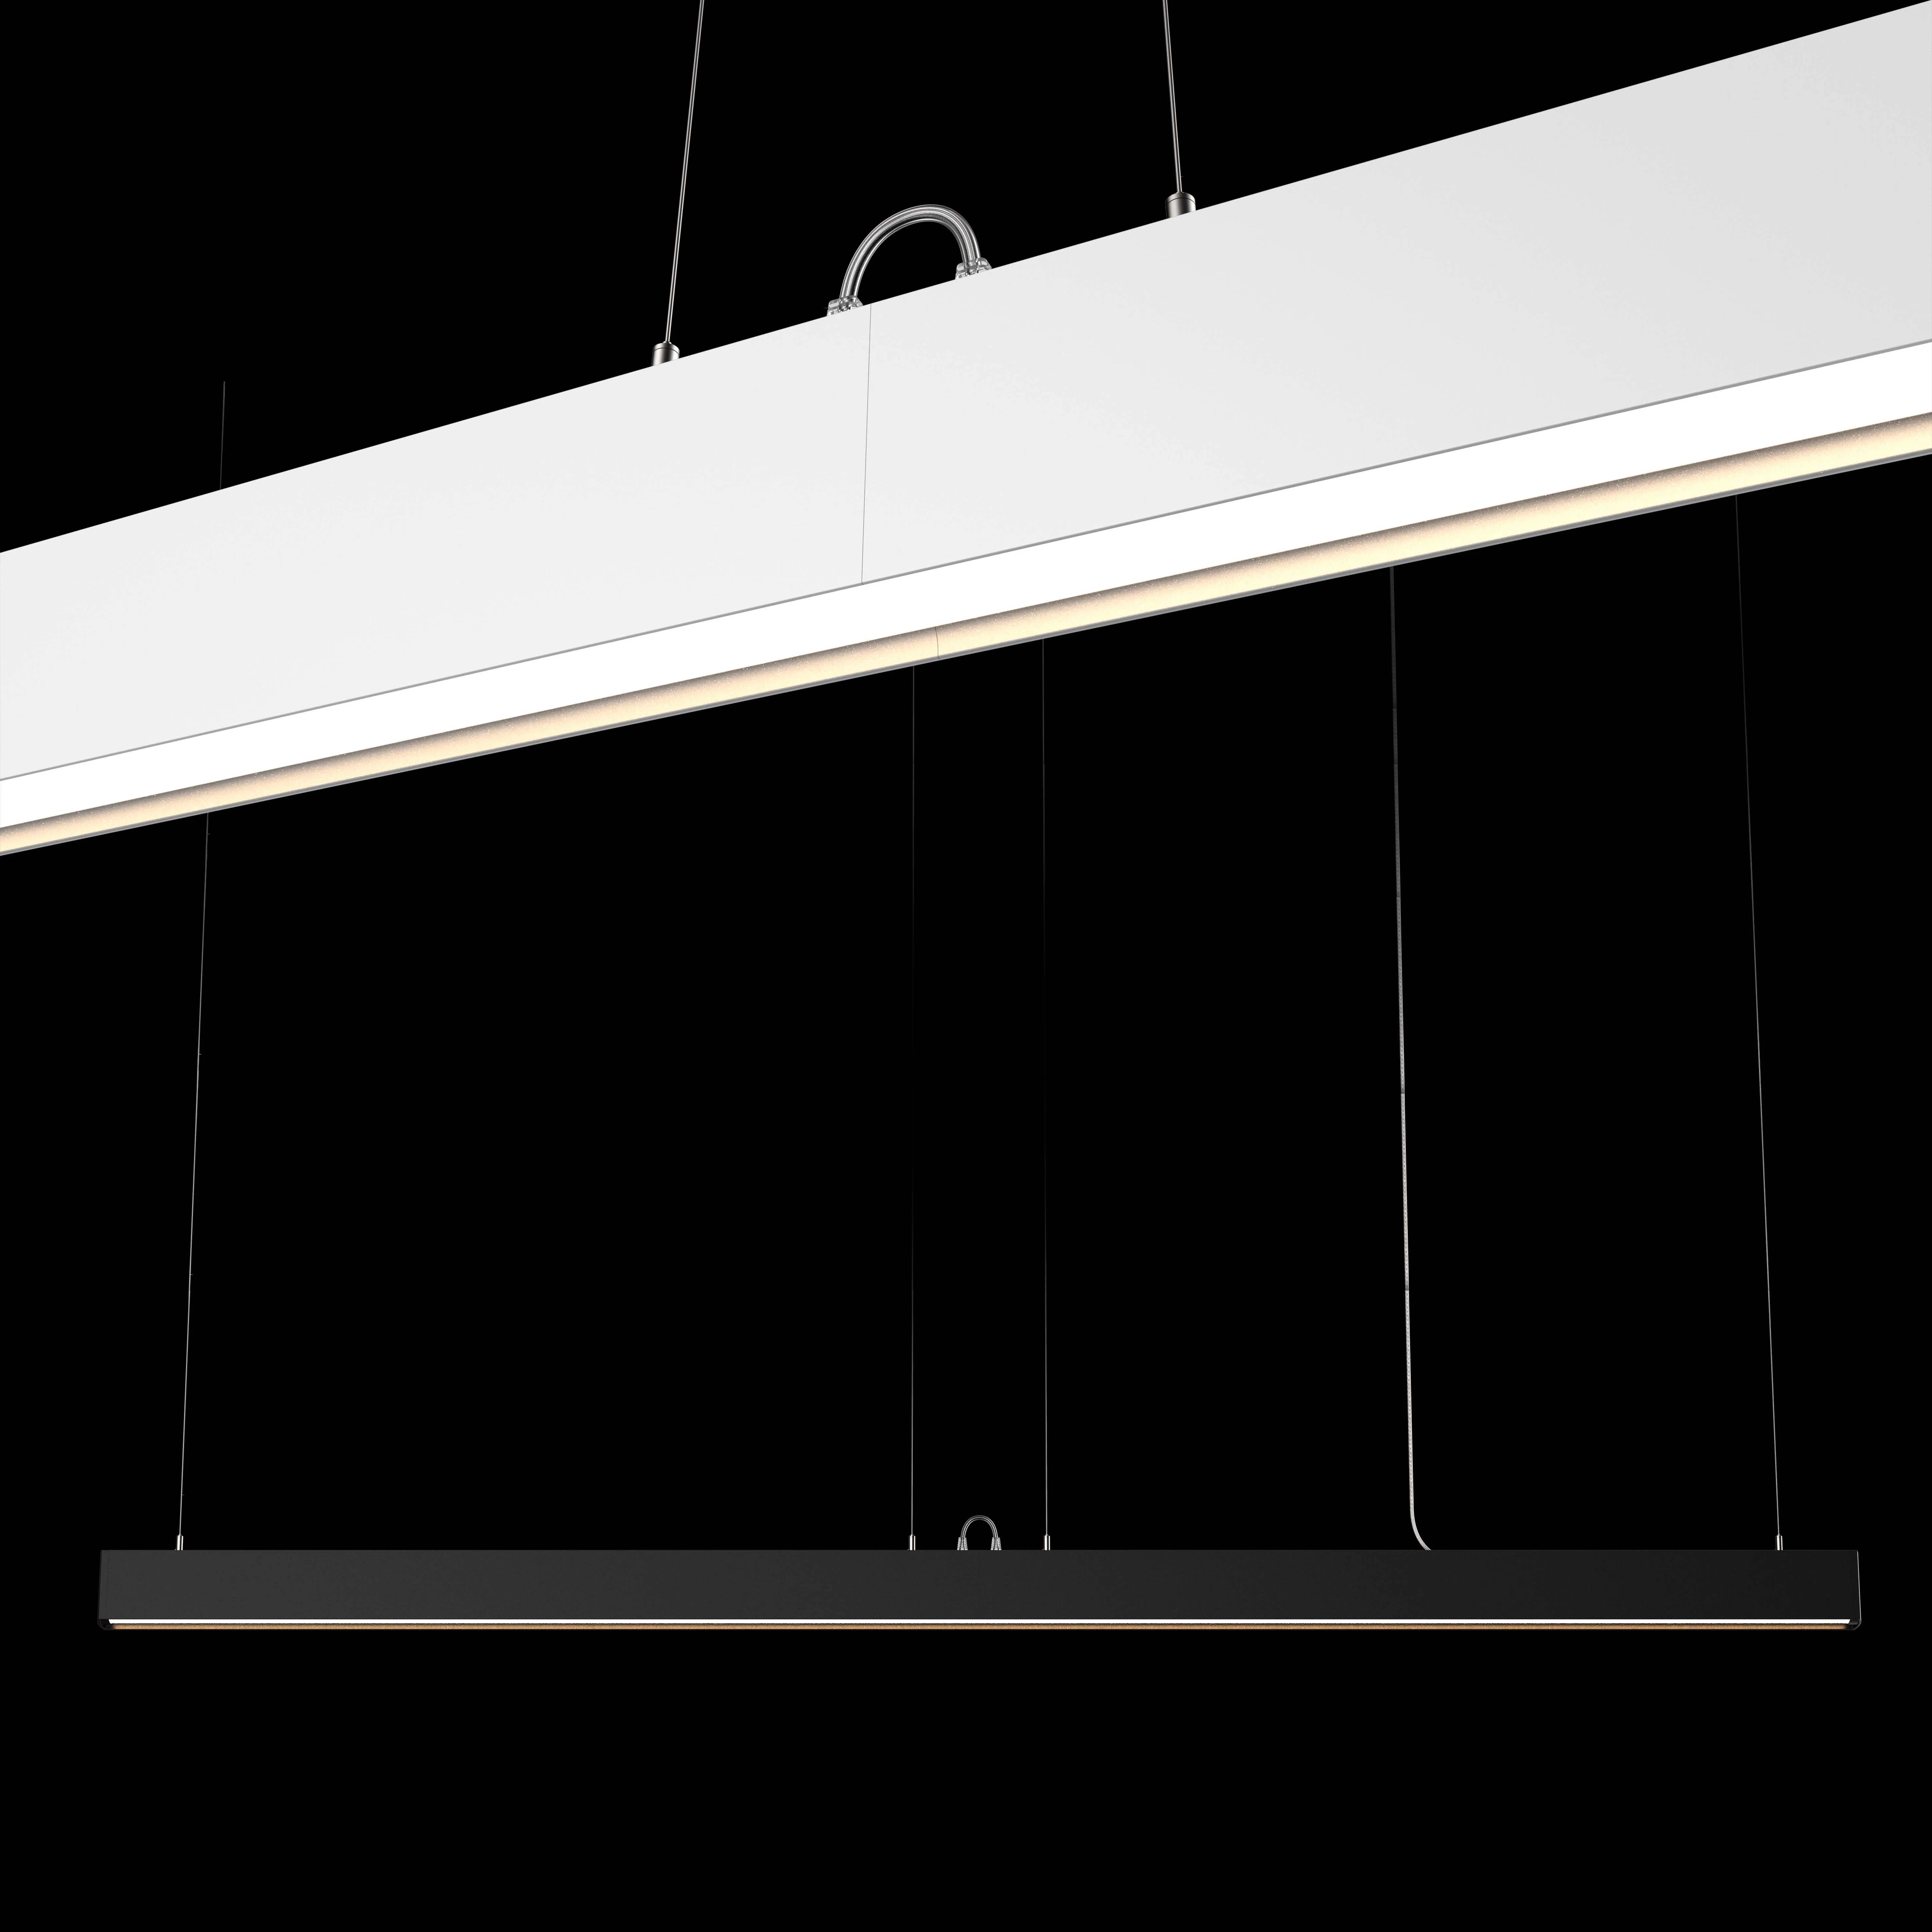 Latest Design Office 18W Linear Led Light With Low Price